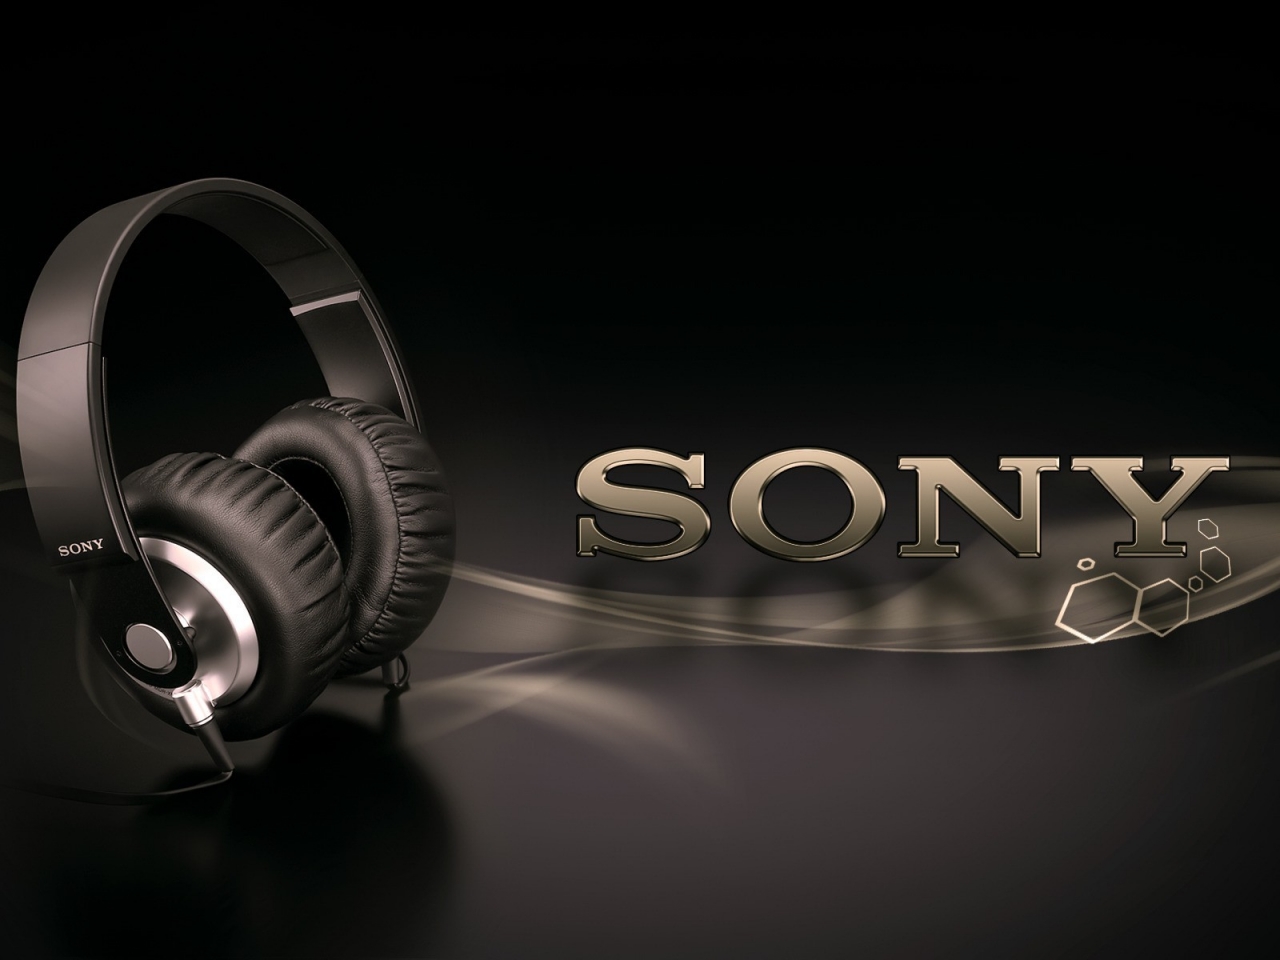 Professional Sony Headphones for 1280 x 960 resolution